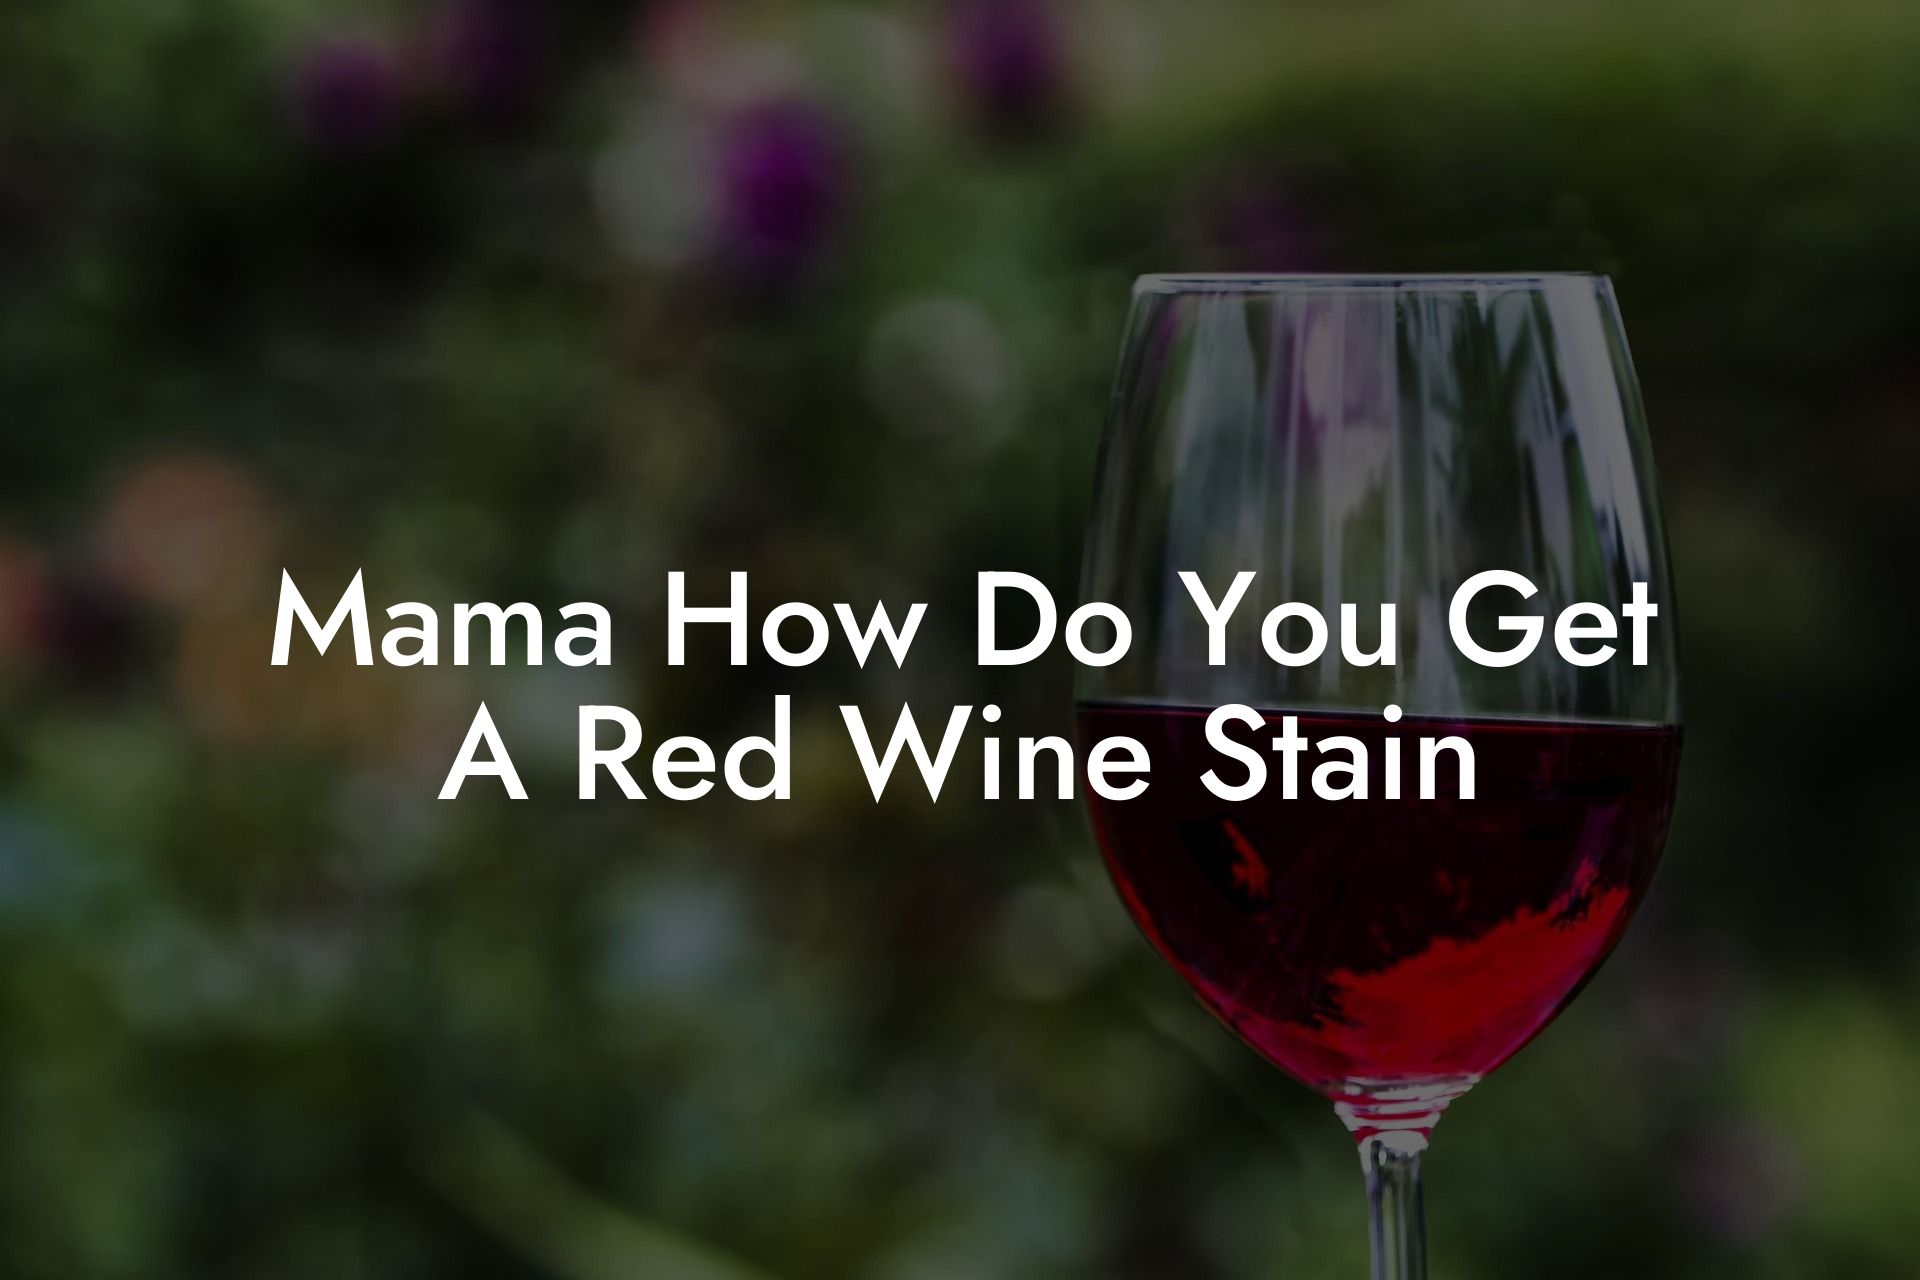 Mama How Do You Get A Red Wine Stain